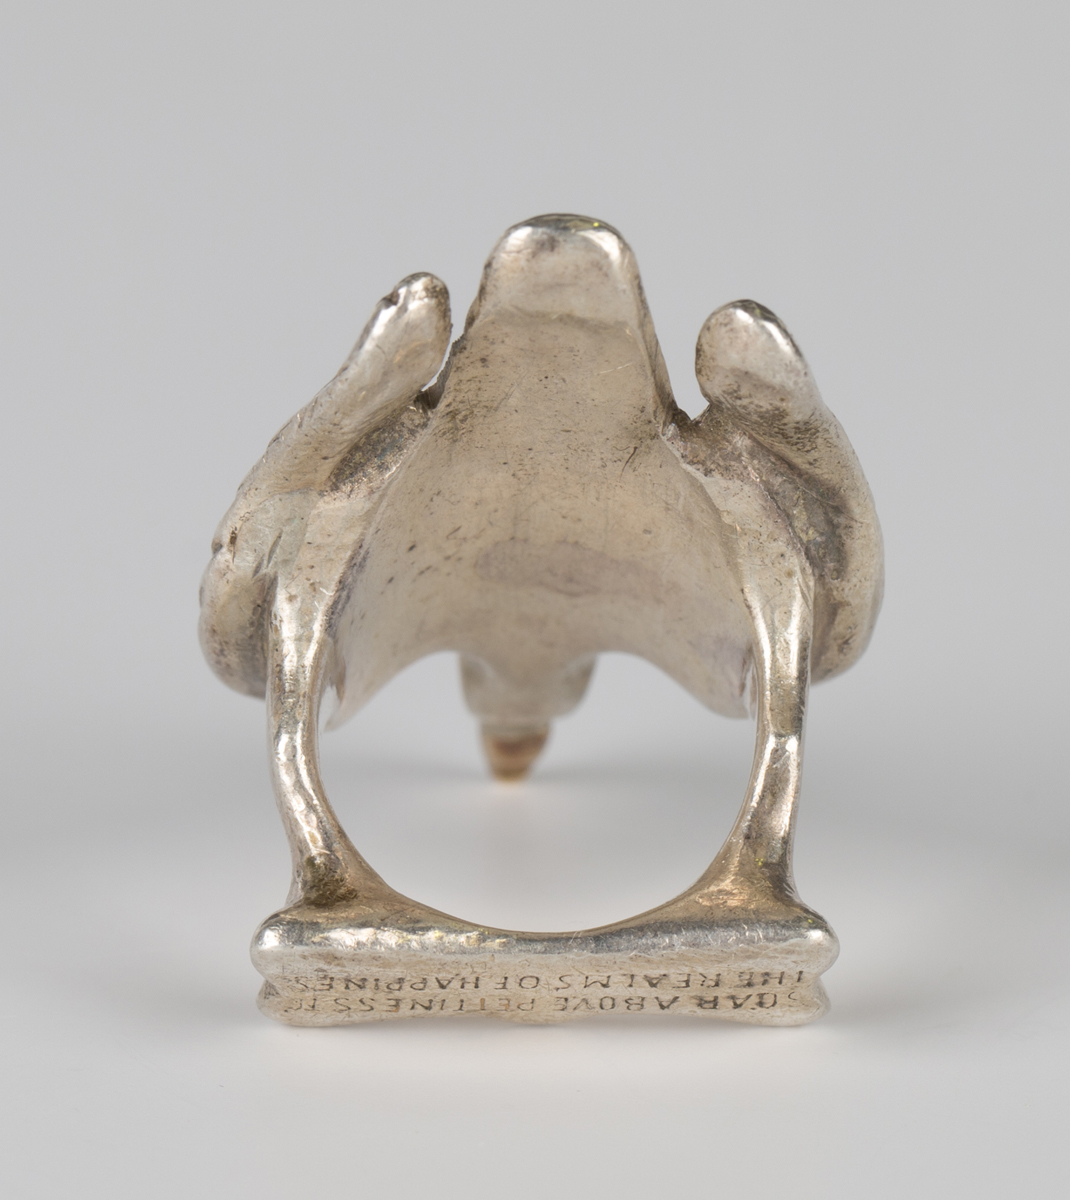 A Moshe Oved silver ring, circa 1940s, modelled as a soaring bird, detailed to base 'Soar above - Image 5 of 5